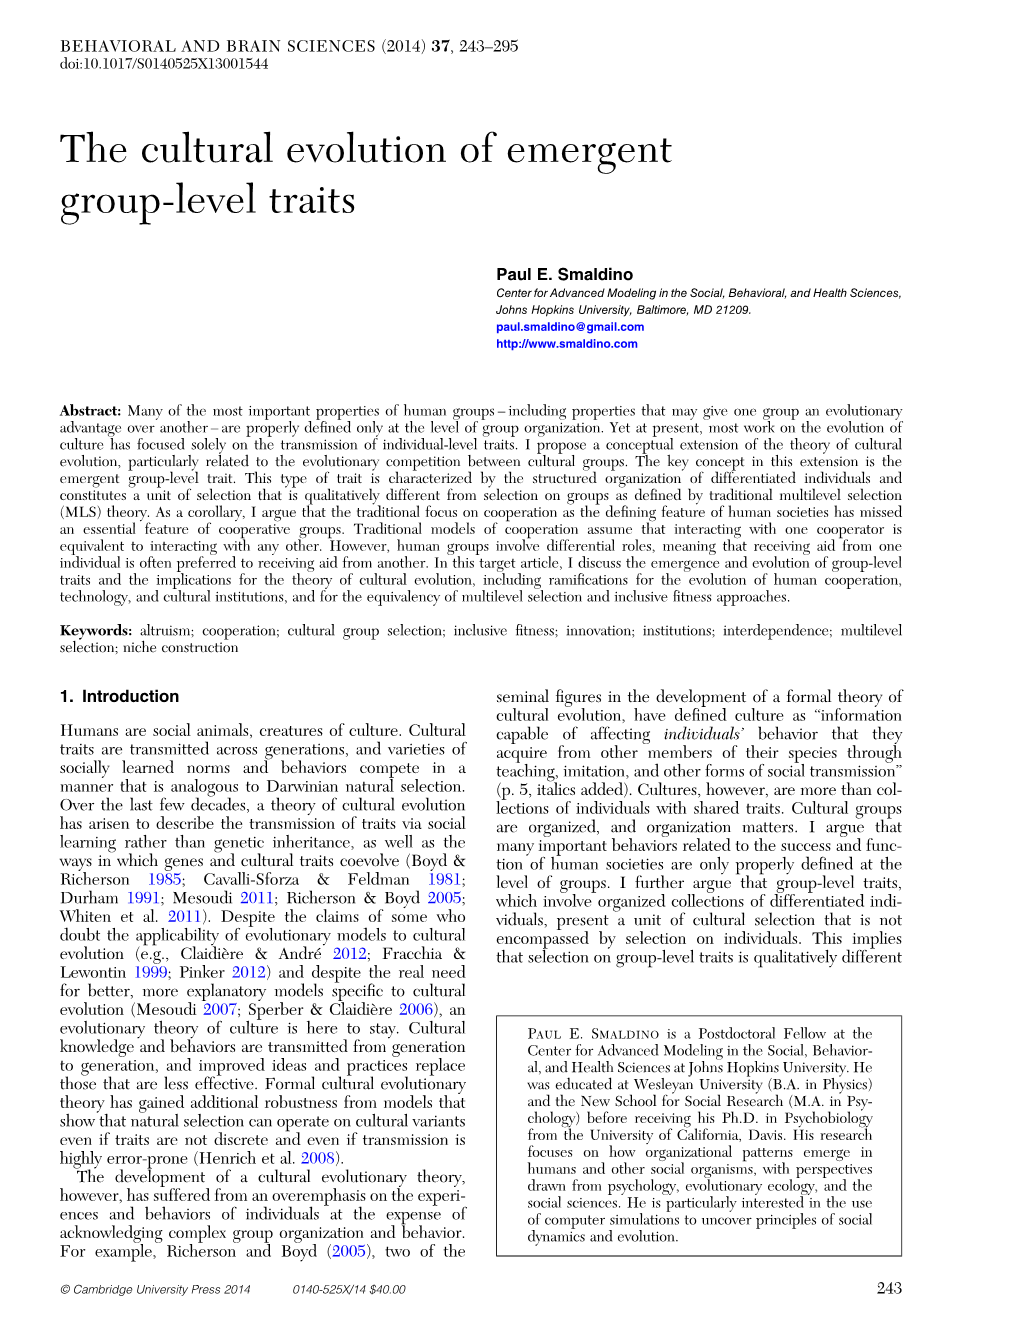 The Cultural Evolution of Emergent Group-Level Traits